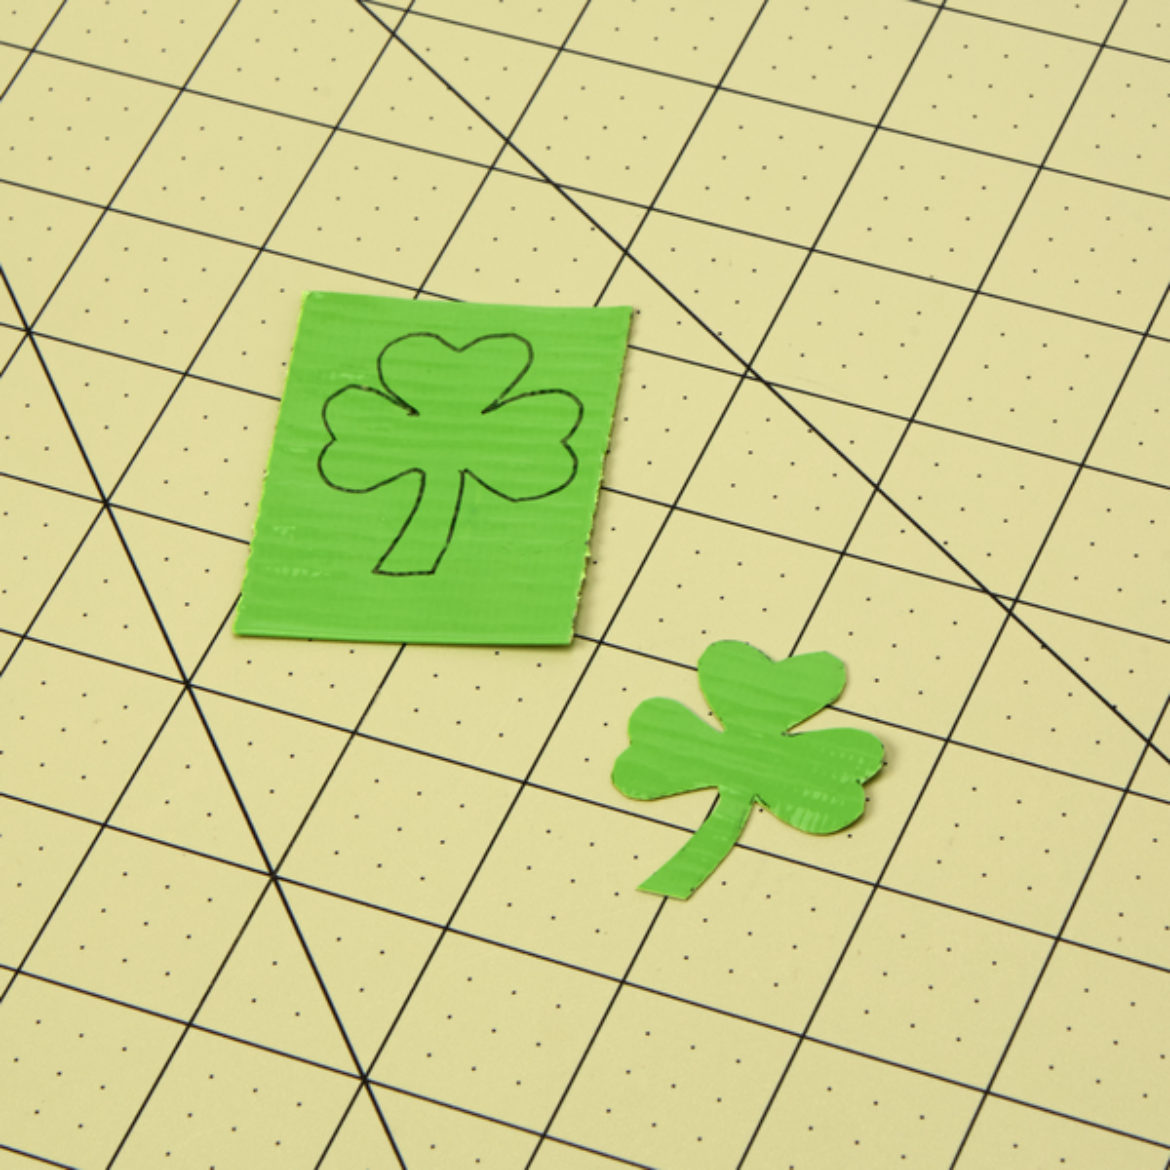 Clover shape traced onto a double piece of light green Duck Tape and cut out